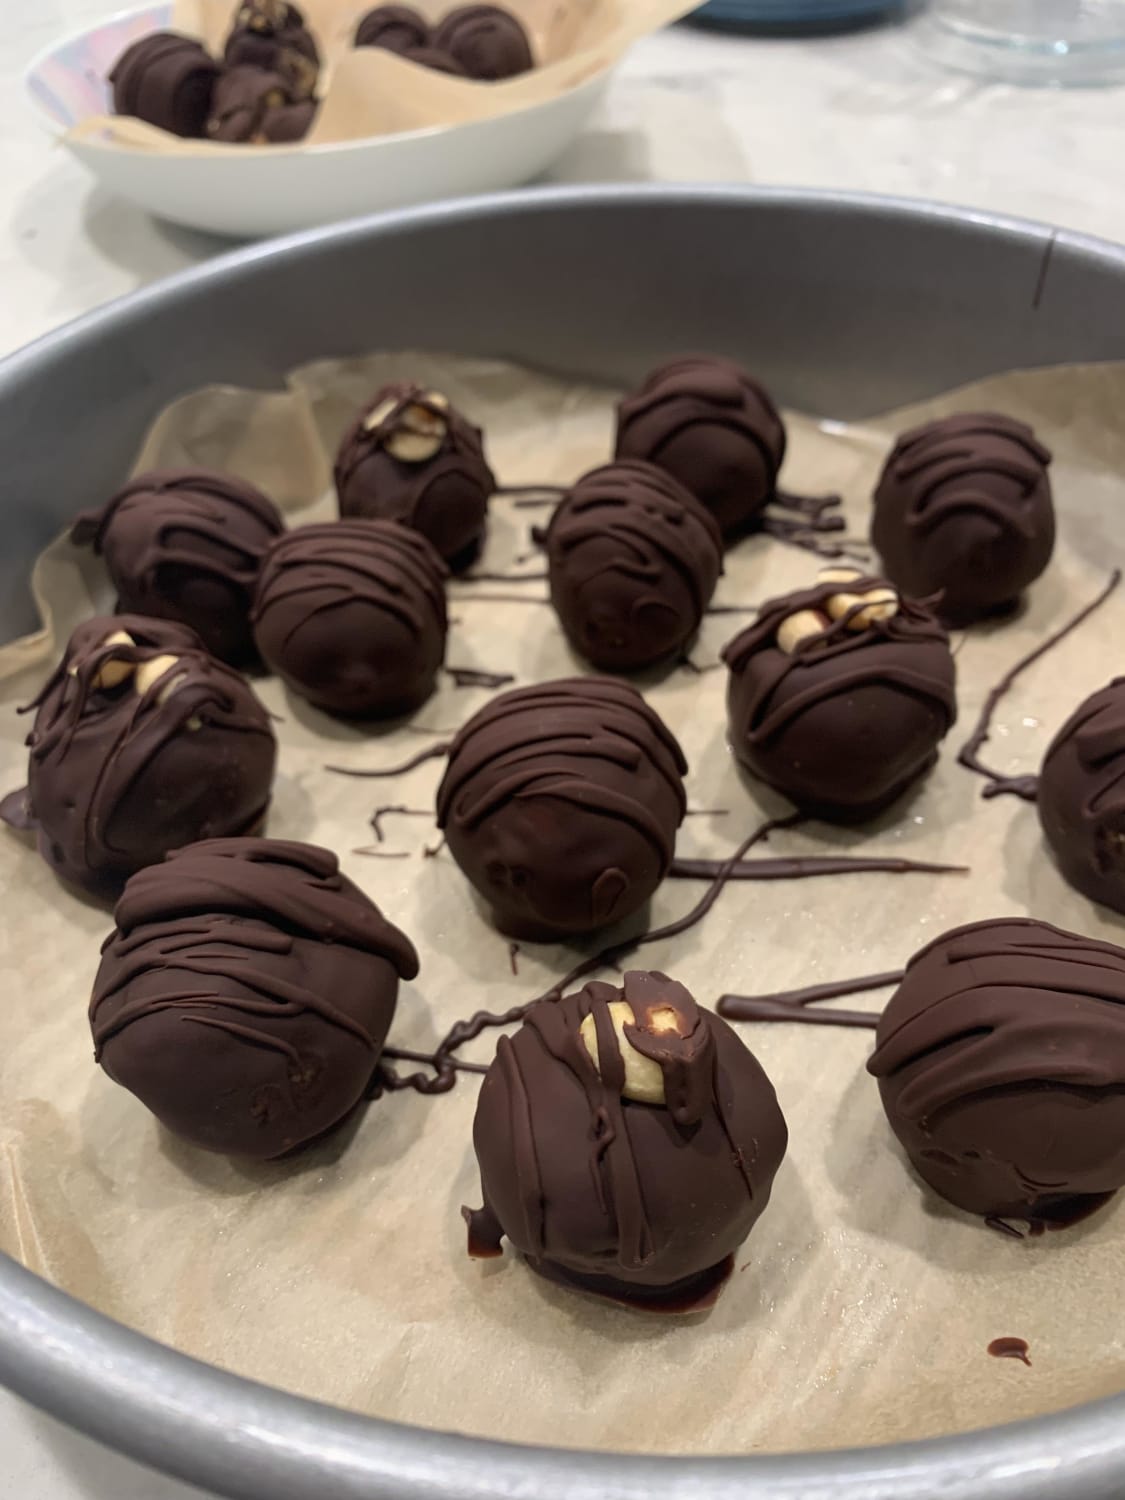 Chocolate peanut butter balls makes the cutest little gift 🥰